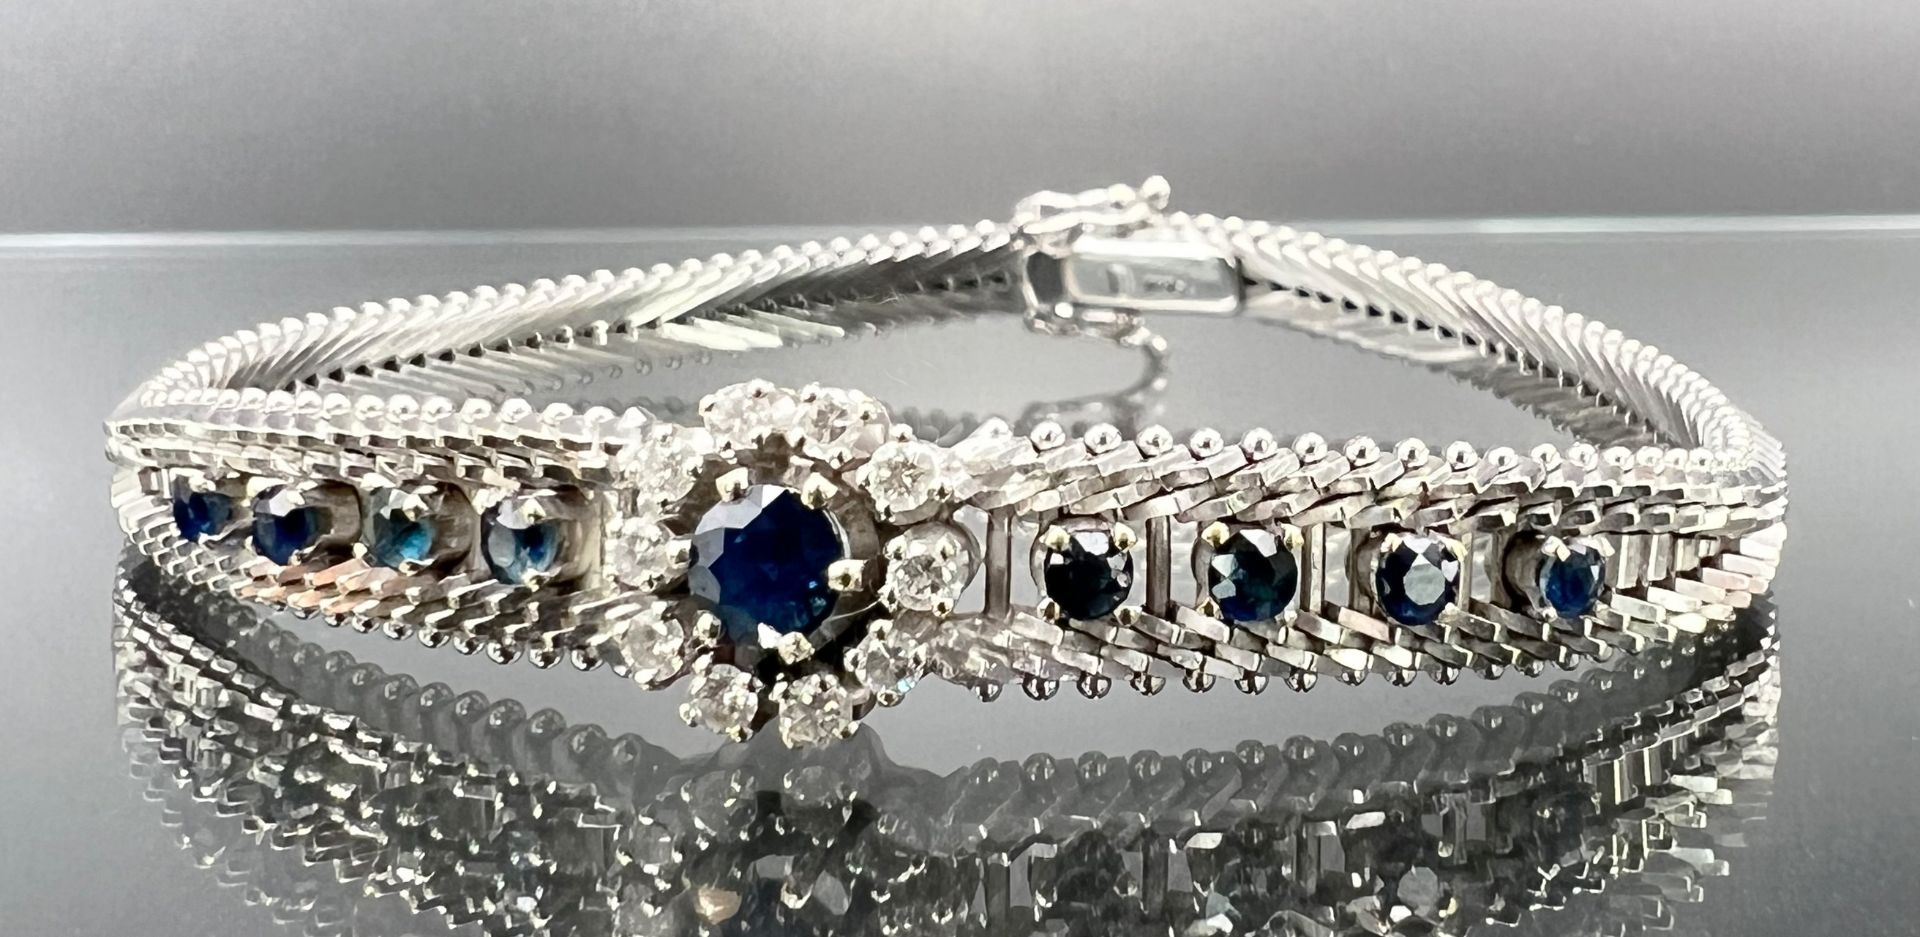 Bracelet 585 white gold with diamonds and sapphires. - Image 2 of 6